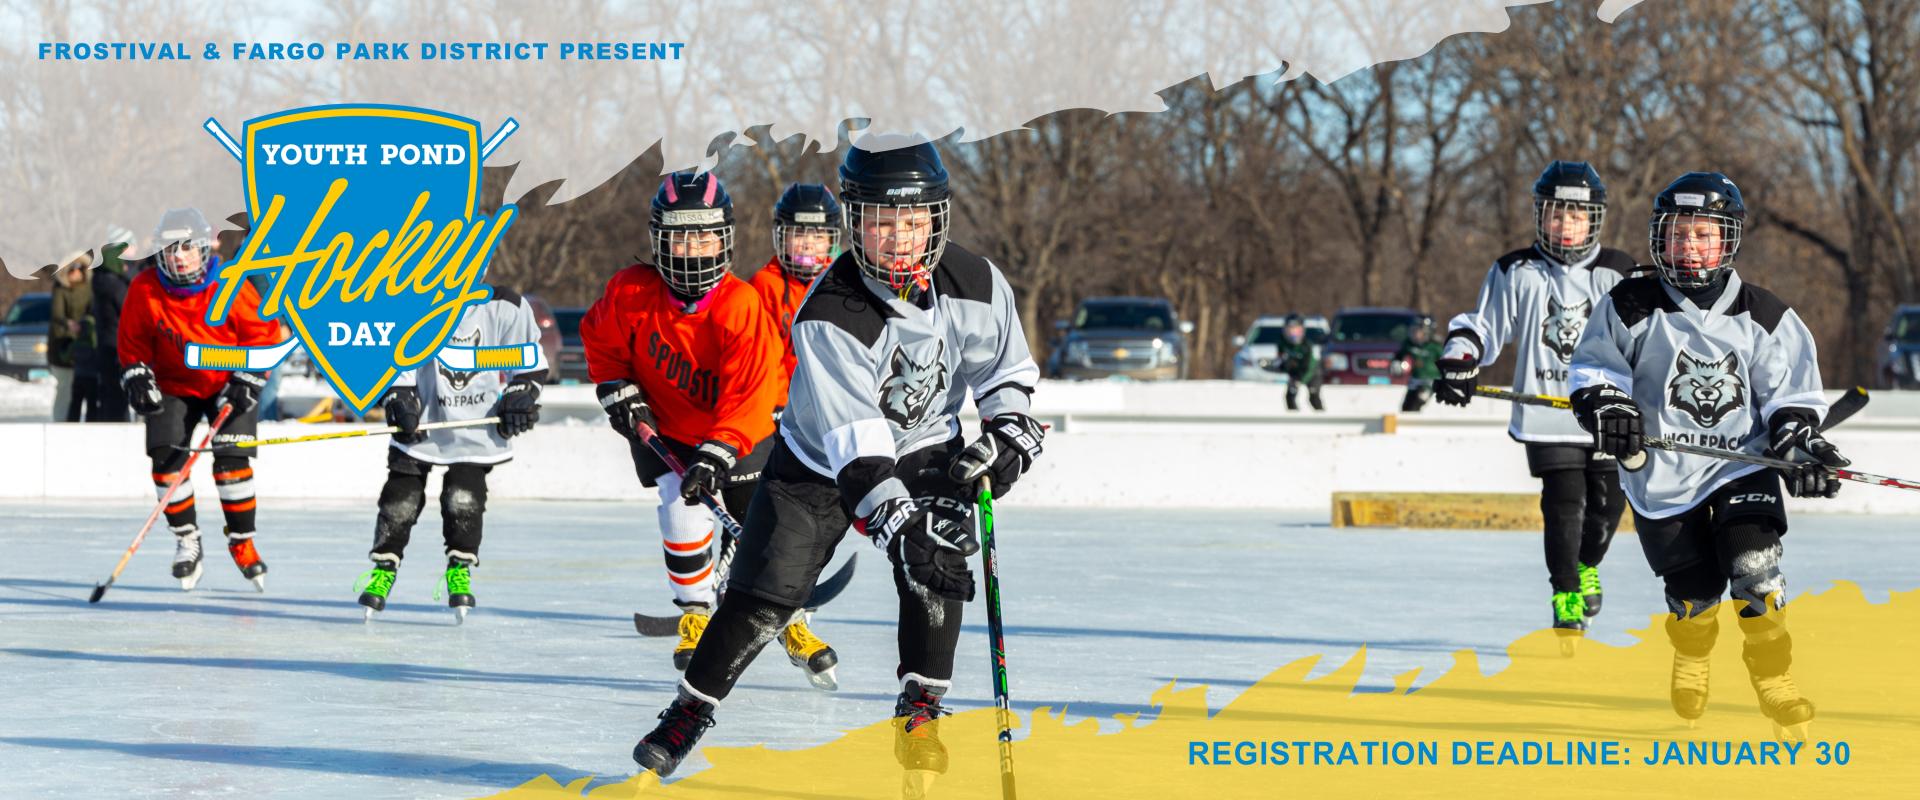 two groups of kids playing hockey on outdoor rink - Text Frostival & Fargo Park District Present Youth Pond Hockey Day logo - Registration Deadline: January 30